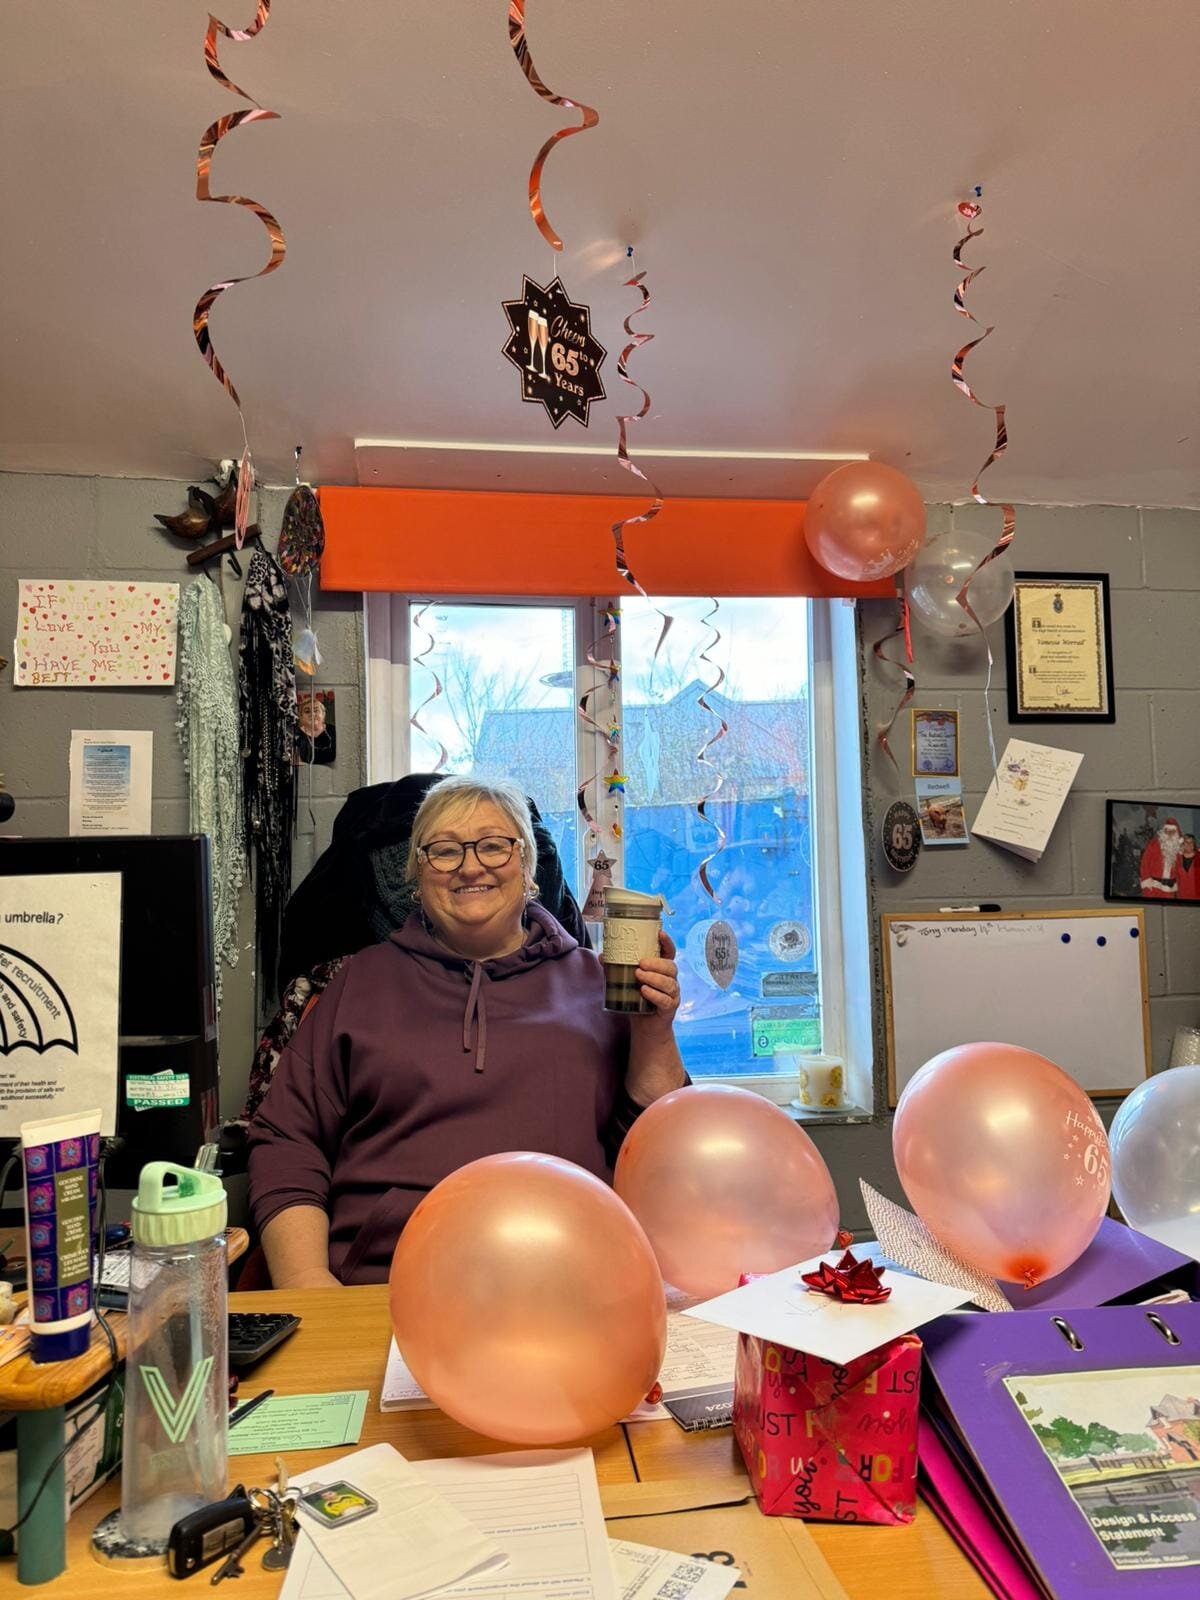 A massive Happy 65th Birthday to the Queen of the Redwell Centre. We all wish you Vanessa Worrall the best Birthday celebrations. Lots of love your team xxxx🎉